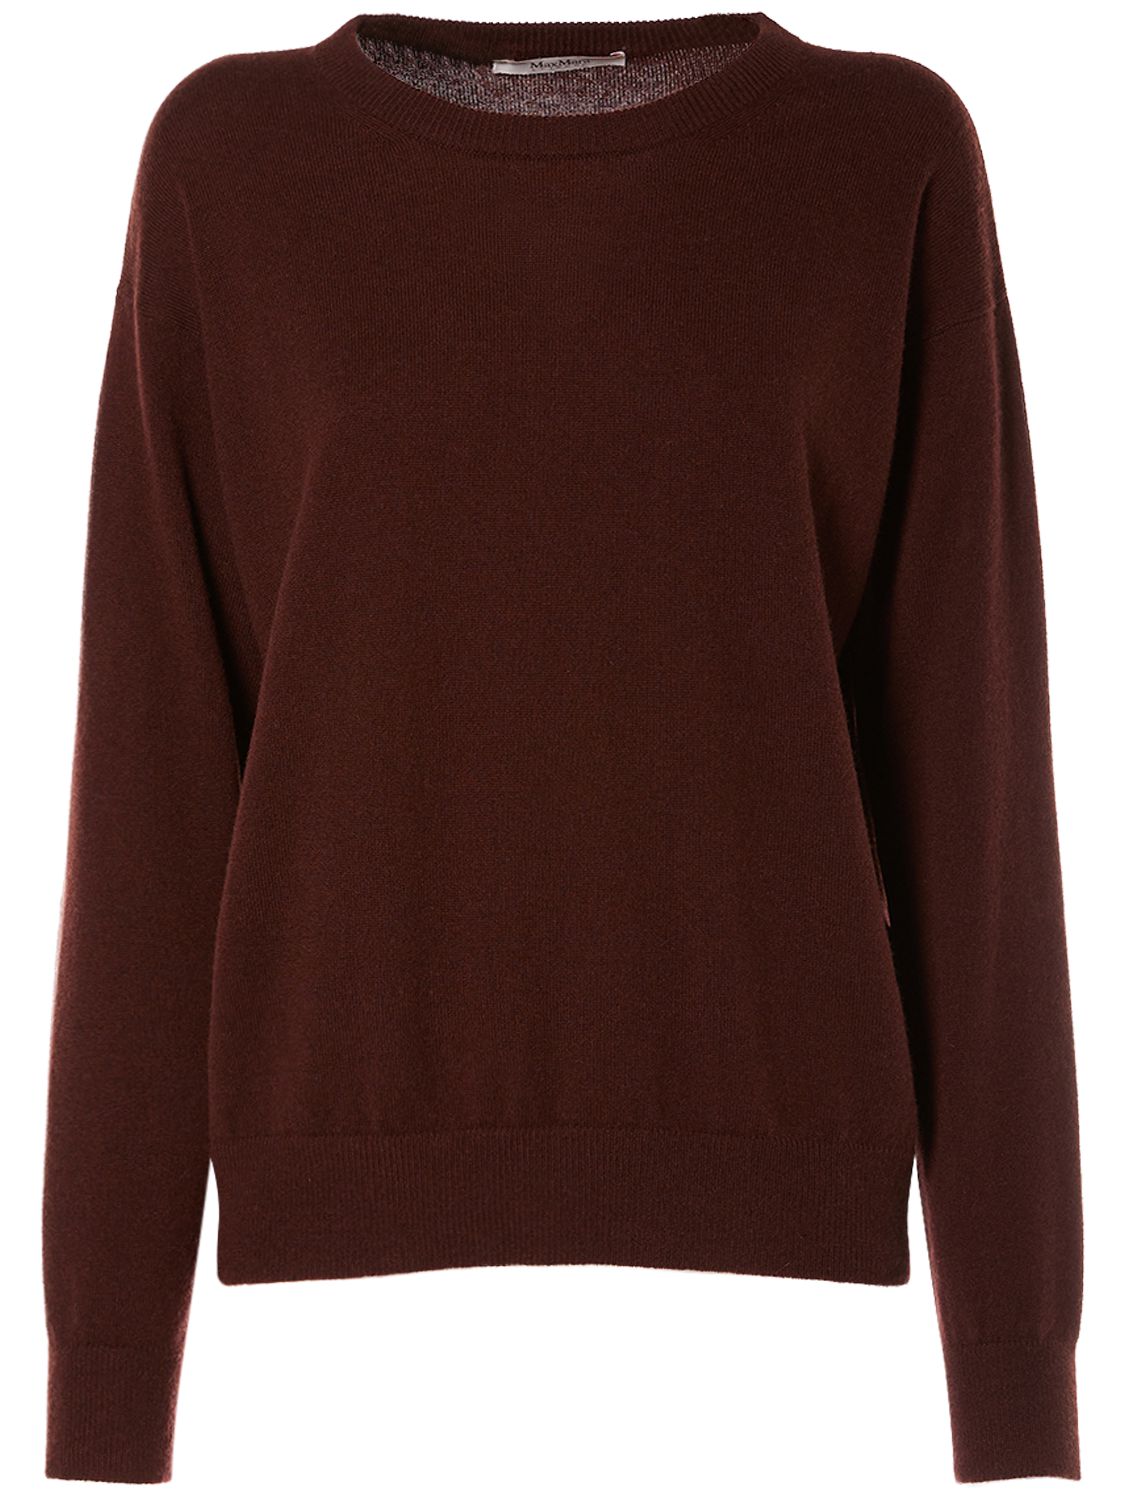 Magico Wool & Cashmere Knit Sweater